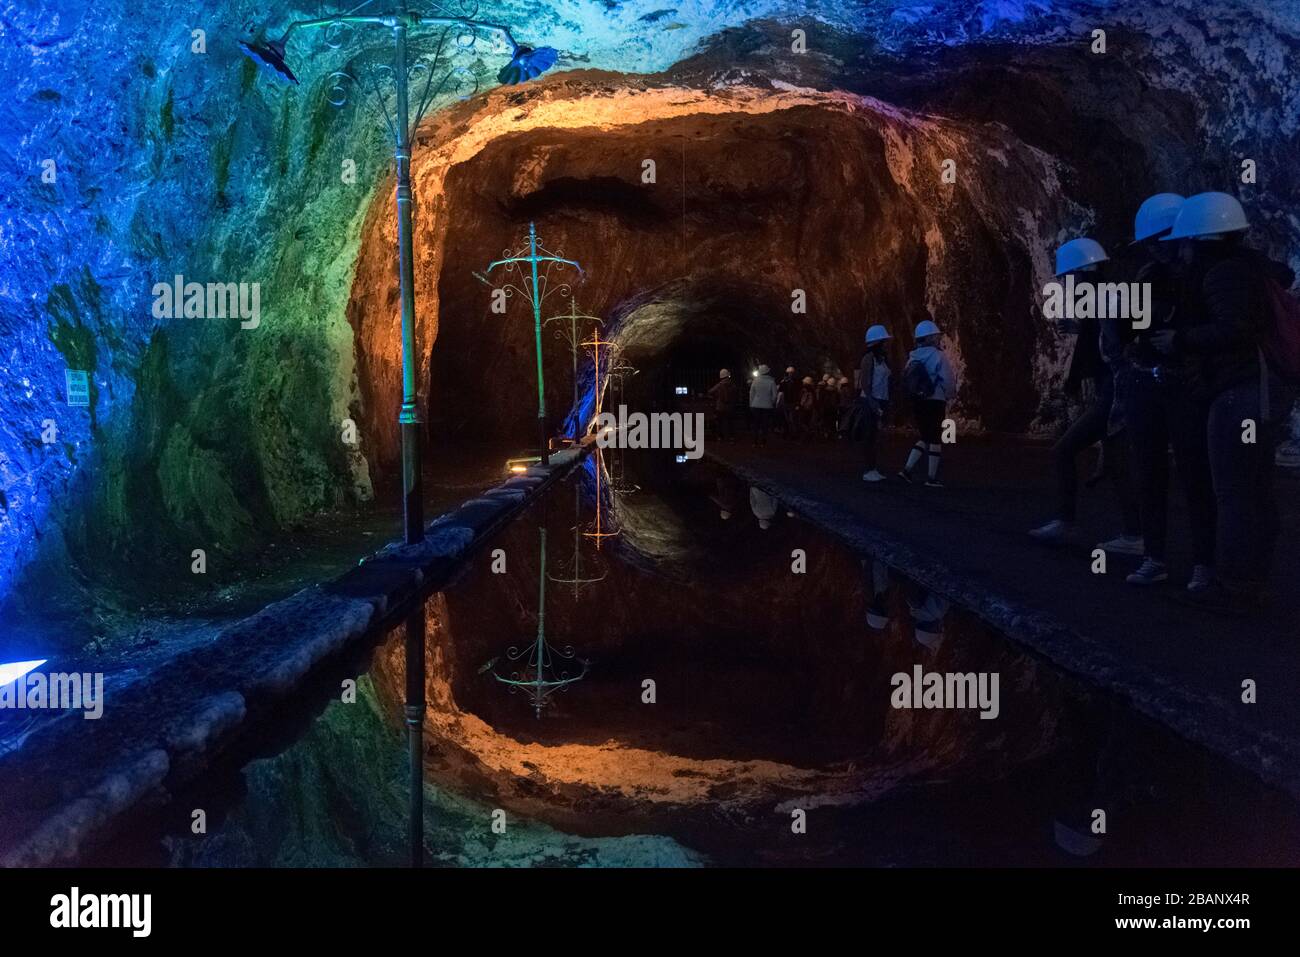 Nemocon, Cundinamarca / Colombia; March 24, 2018: mirror of water and walls illuminated with colored lights inside a salt mine Stock Photo